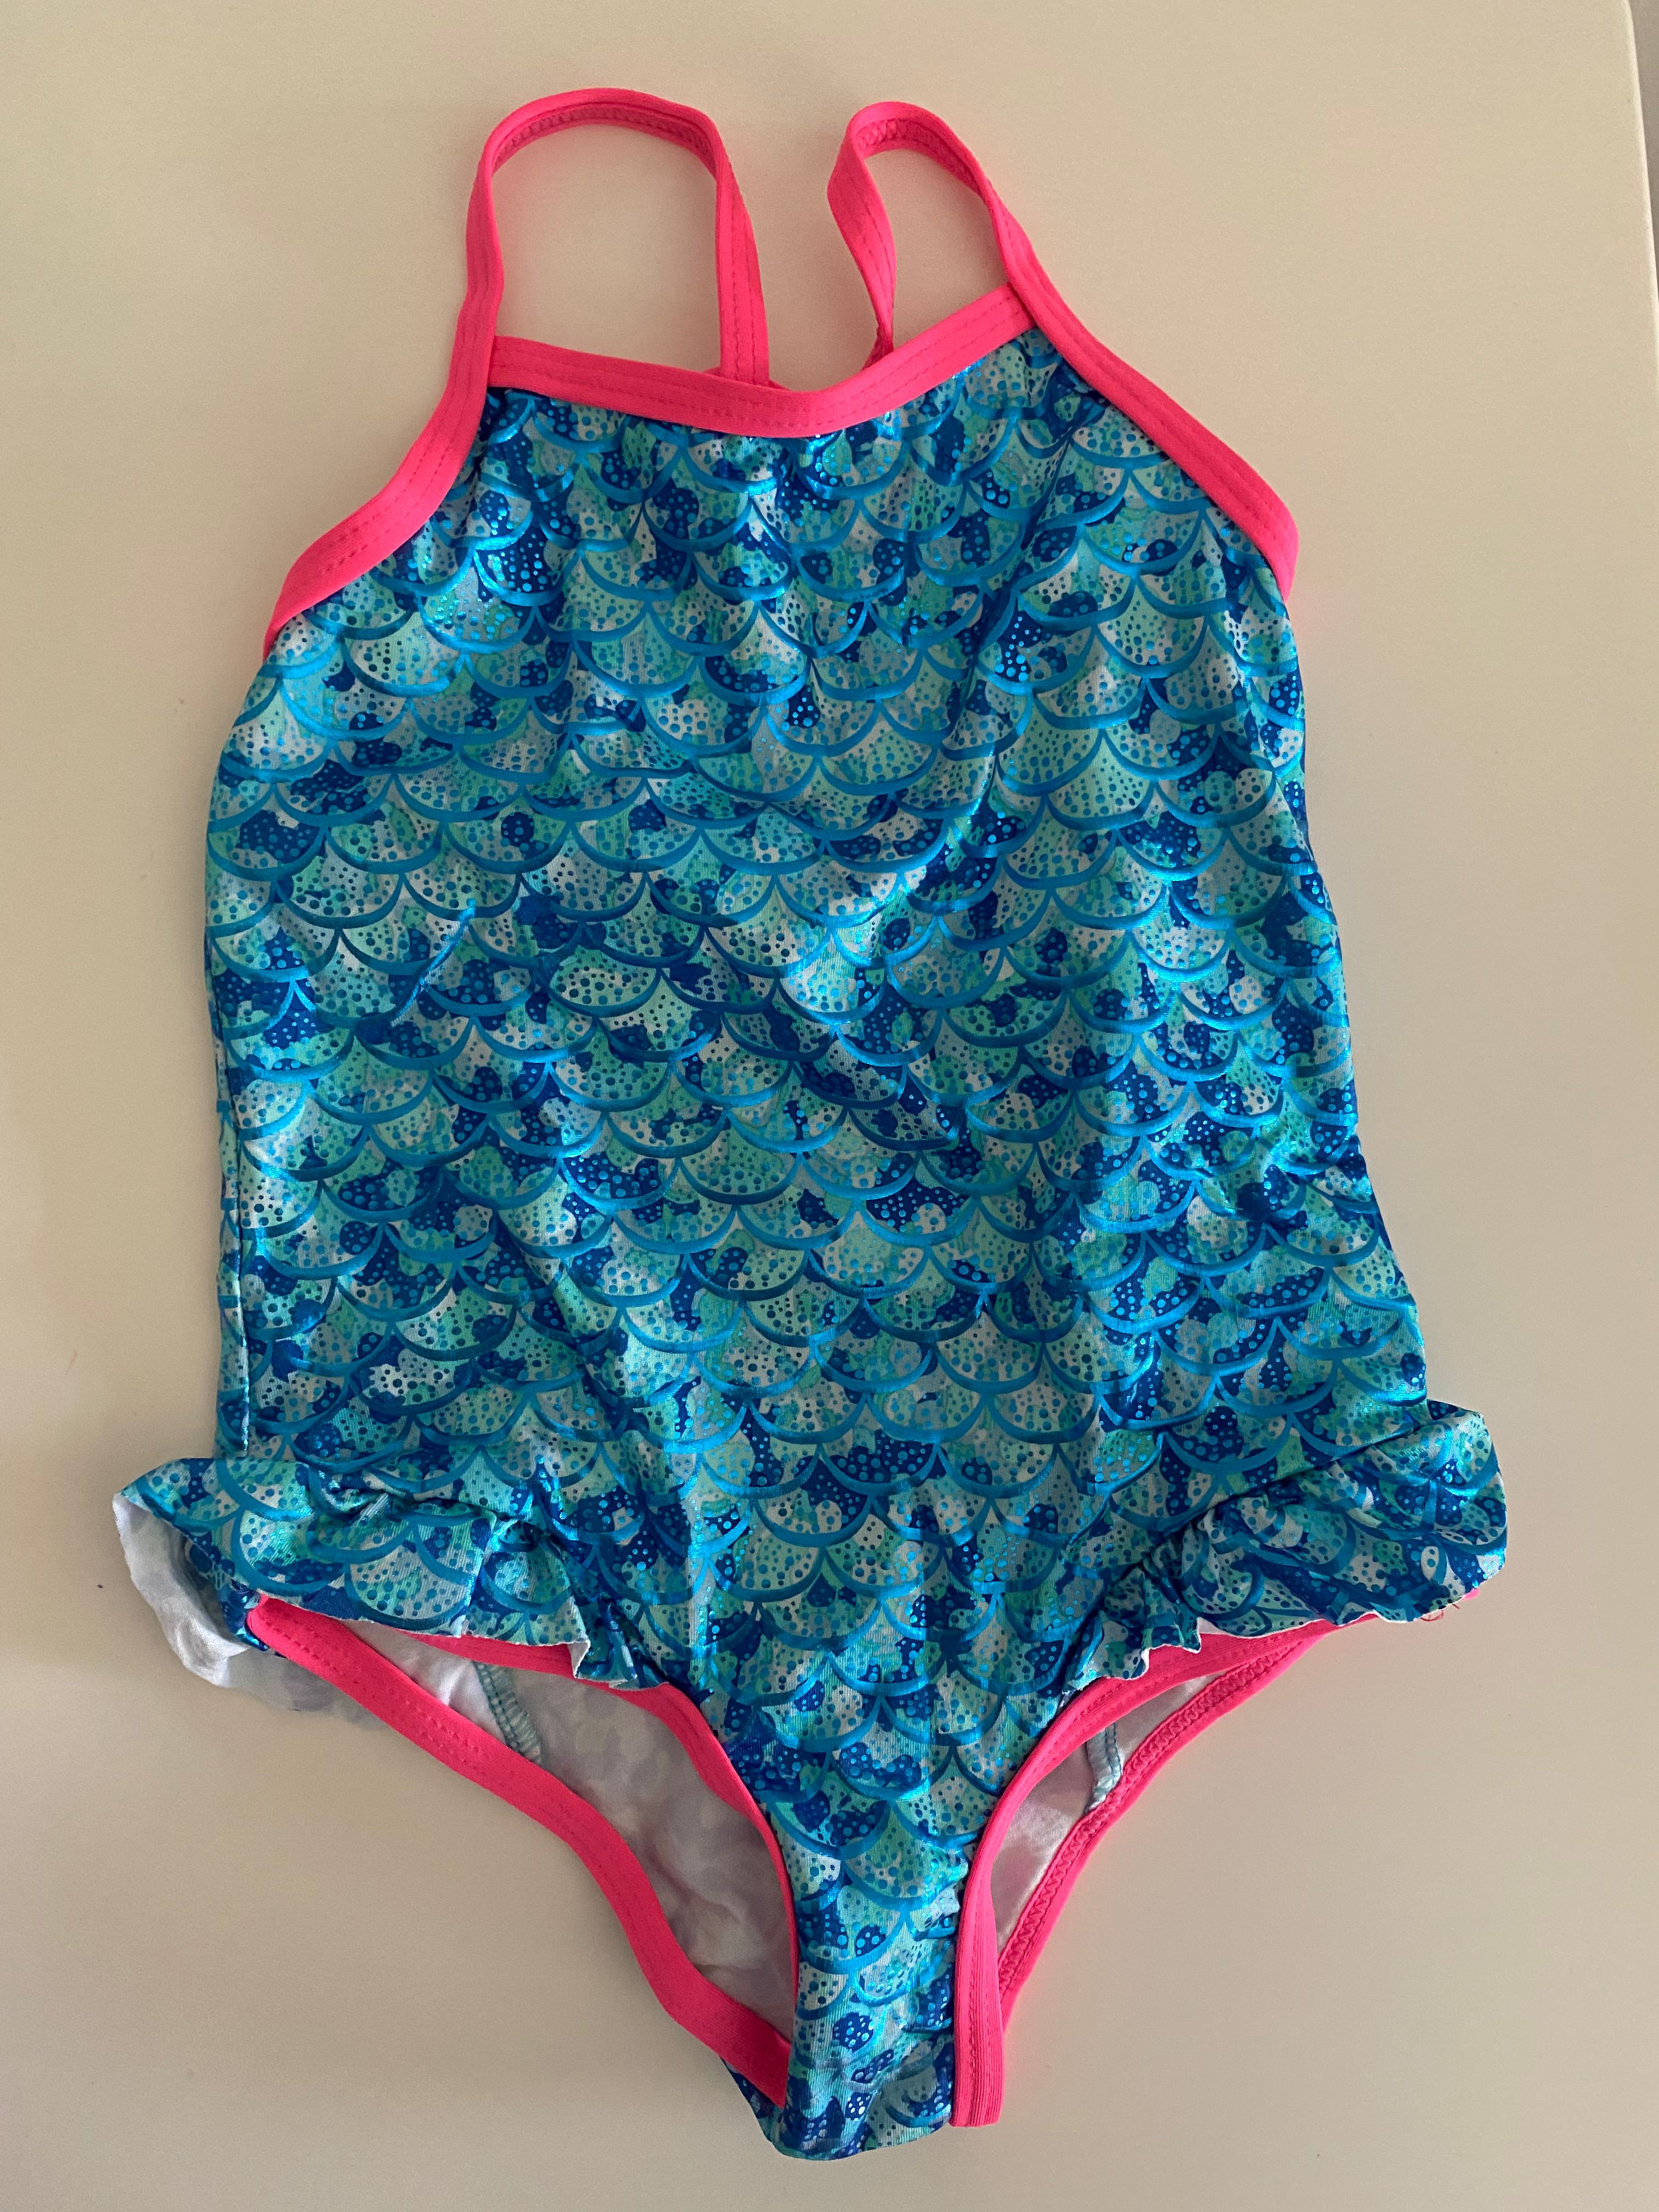 Sparkly bathing suit, Babies & Kids, Babies & Kids Fashion on Carousell